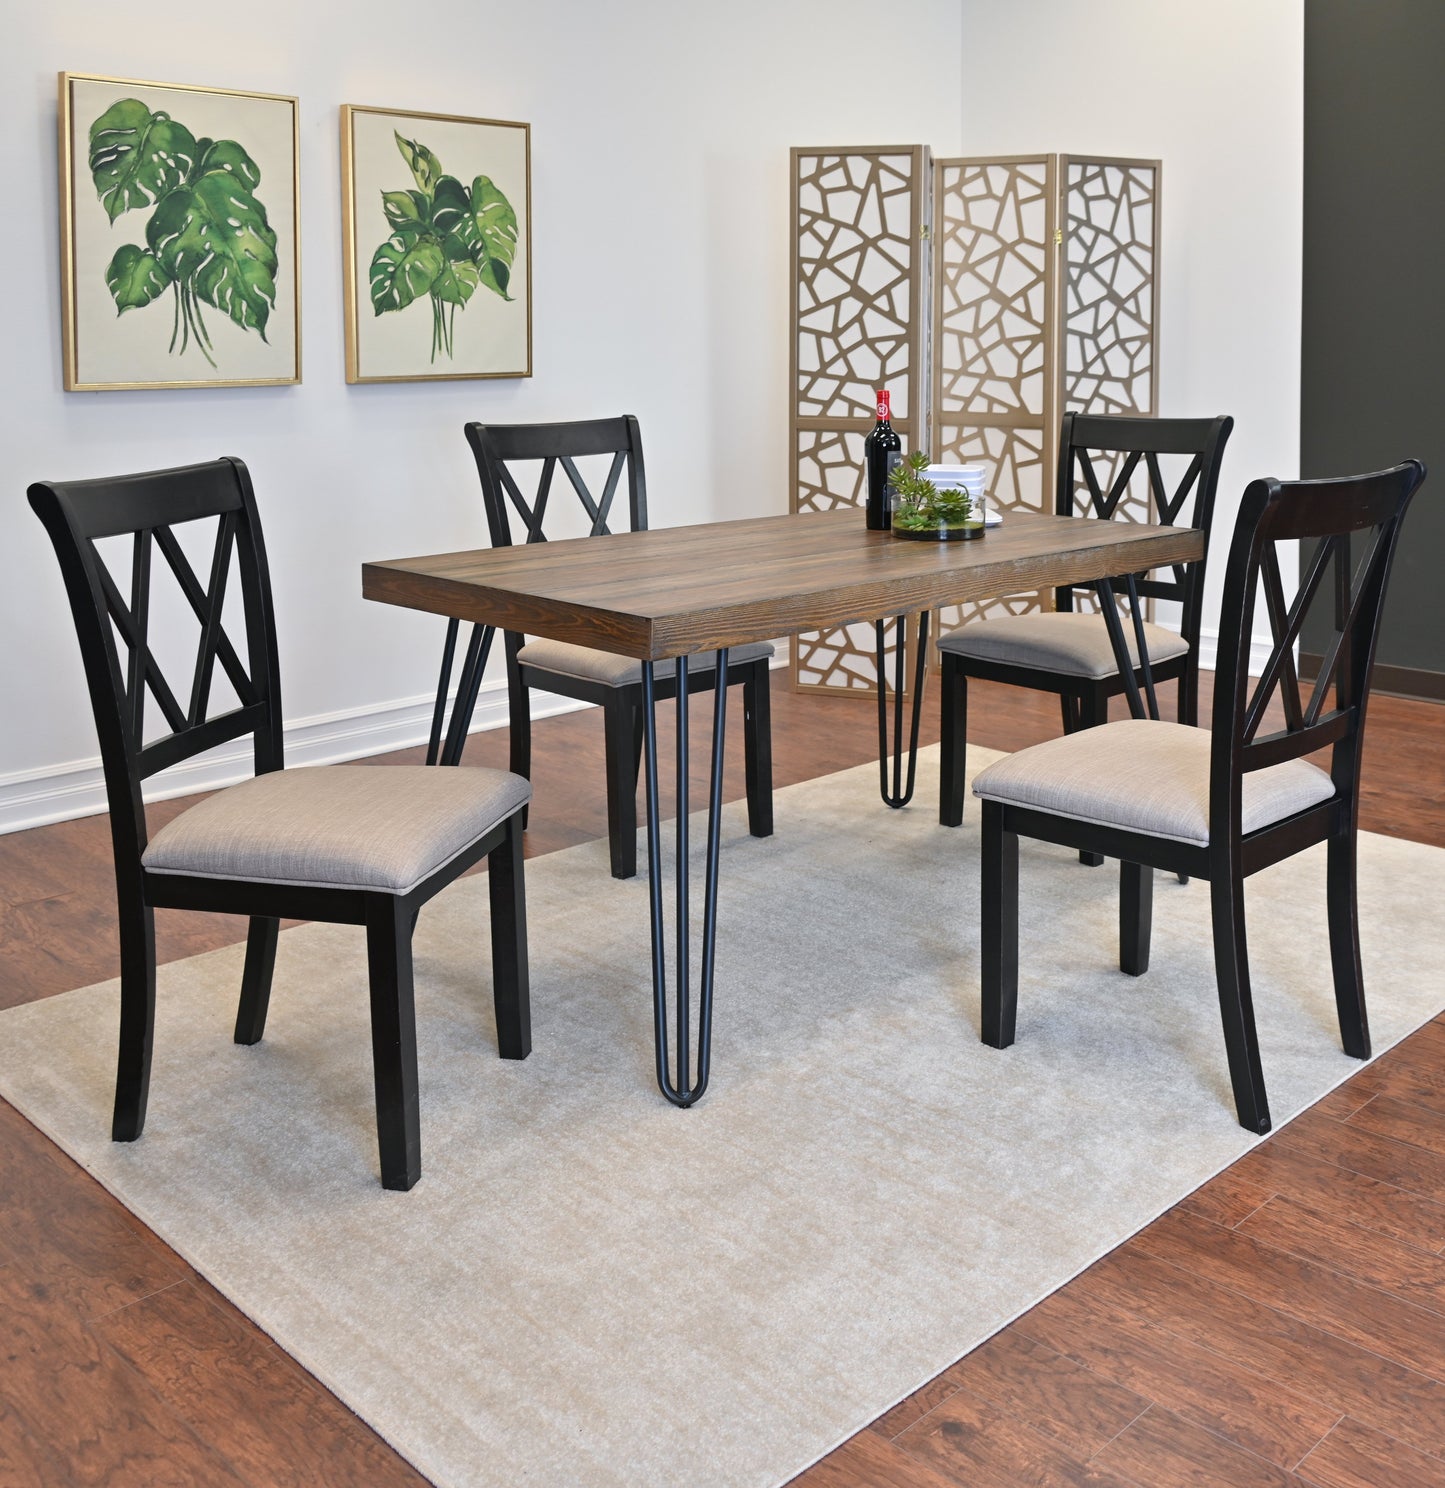 Arroyo 5-Piece Dining Set, Hairpin Dining Table with 4 Cross-back Chairs, Rich Black